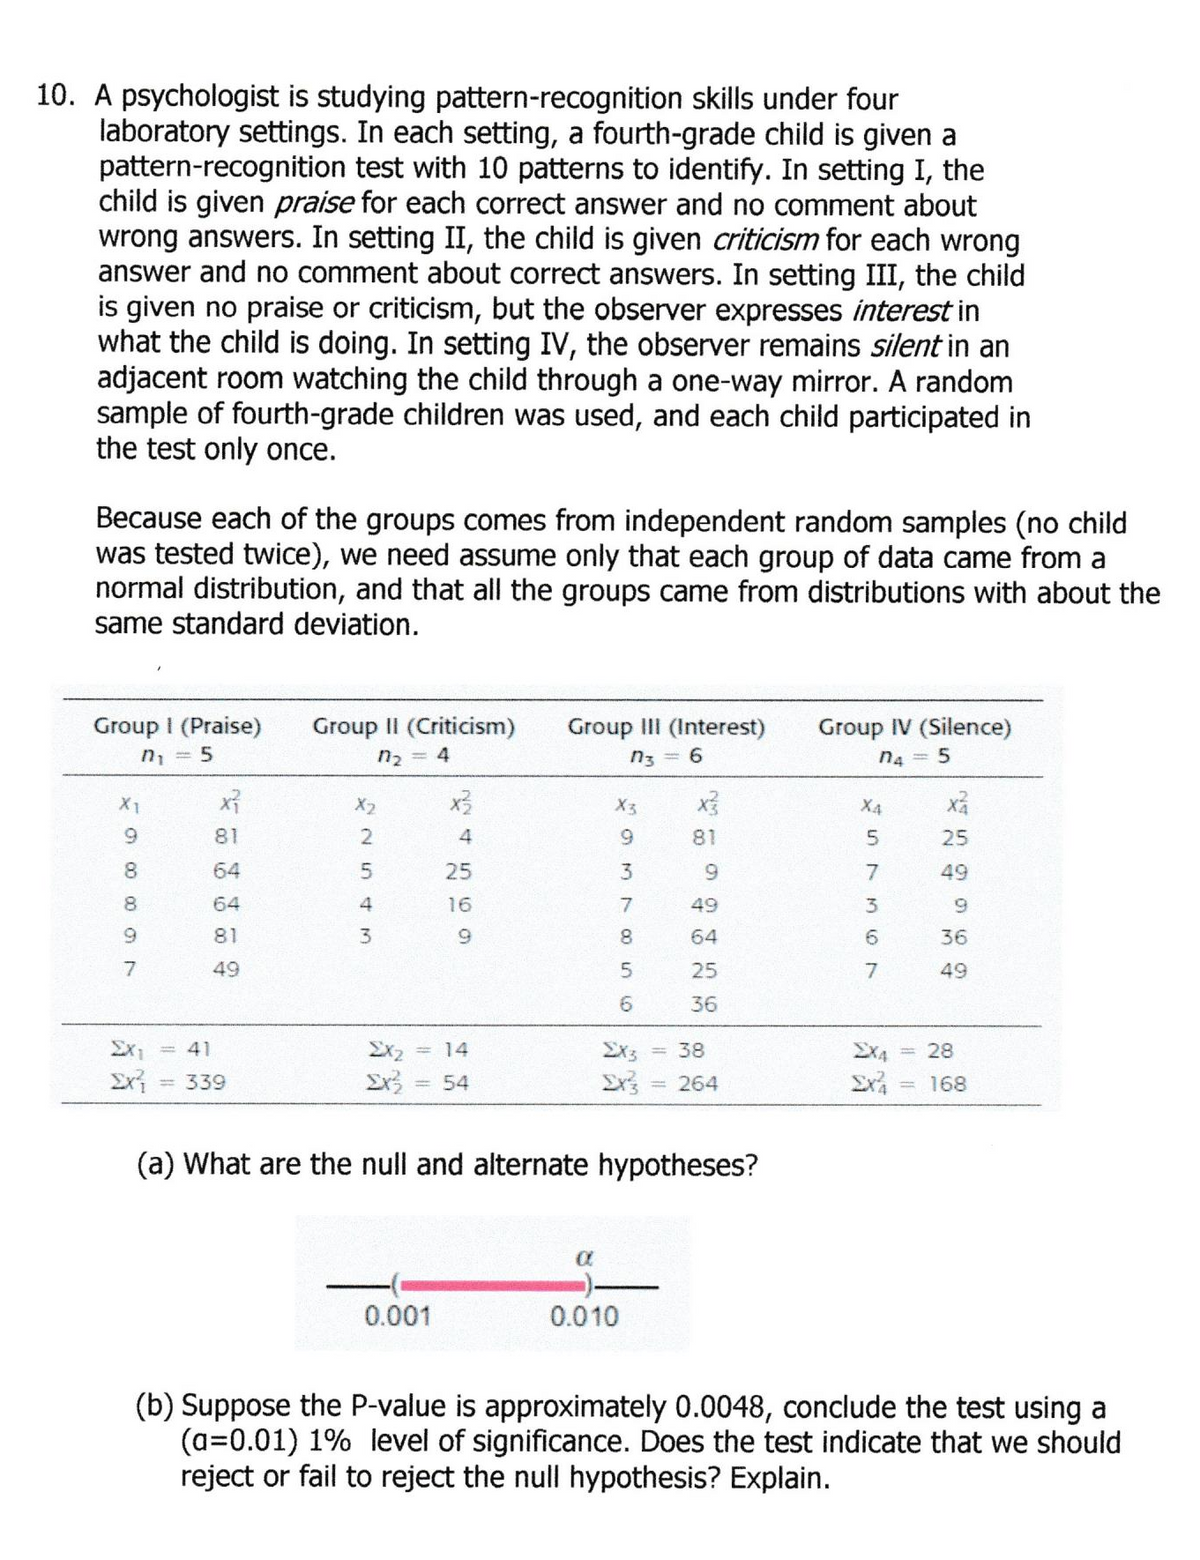 10. A psychologist is studying pattern-recognition skills under four
laboratory settings. In each setting, a fourth-grade child is given a
pattern-recognition test with 10 patterns to identify. In setting I, the
child is given praise for each correct answer and no comment about
wrong answers. In setting II, the child is given criticism for each wrong
answer and no comment about correct answers. In setting III, the child
is given no praise or criticism, but the observer expresses interest in
what the child is doing. In setting IV, the observer remains silent in an
adjacent room watching the child through a one-way mirror. A random
sample of fourth-grade children was used, and each child participated in
the test only once.
Because each of the groups comes from independent random samples (no child
was tested twice), we need assume only that each group of data came from a
normal distribution, and that all the groups came from distributions with about the
same standard deviation.
Group I (Praise)
Group II (Criticism)
Group III (Interest)
Group IV (Silence)
n, = 5
n2 = 4
n3 = 6
n4 = 5
X1
X2
x3
X3
X4
6.
81
4
9.
81
25
8
64
25
6.
7
49
8
64
16
49
9.
6.
81
9.
8.
64
6.
36
49
25
7.
49
6.
36
Ex1
= 41
Ex2
= 14
Ex3
= 38
EX4
28
339
54
= 264
= 168
(a) What are the null and alternate hypotheses?
0.001
0.010
(b) Suppose the P-value is approximately 0.0048, conclude the test using a
(a=0.01) 1% level of significance. Does the test indicate that we should
reject or fail to reject the null hypothesis? Explain.
1254 3
